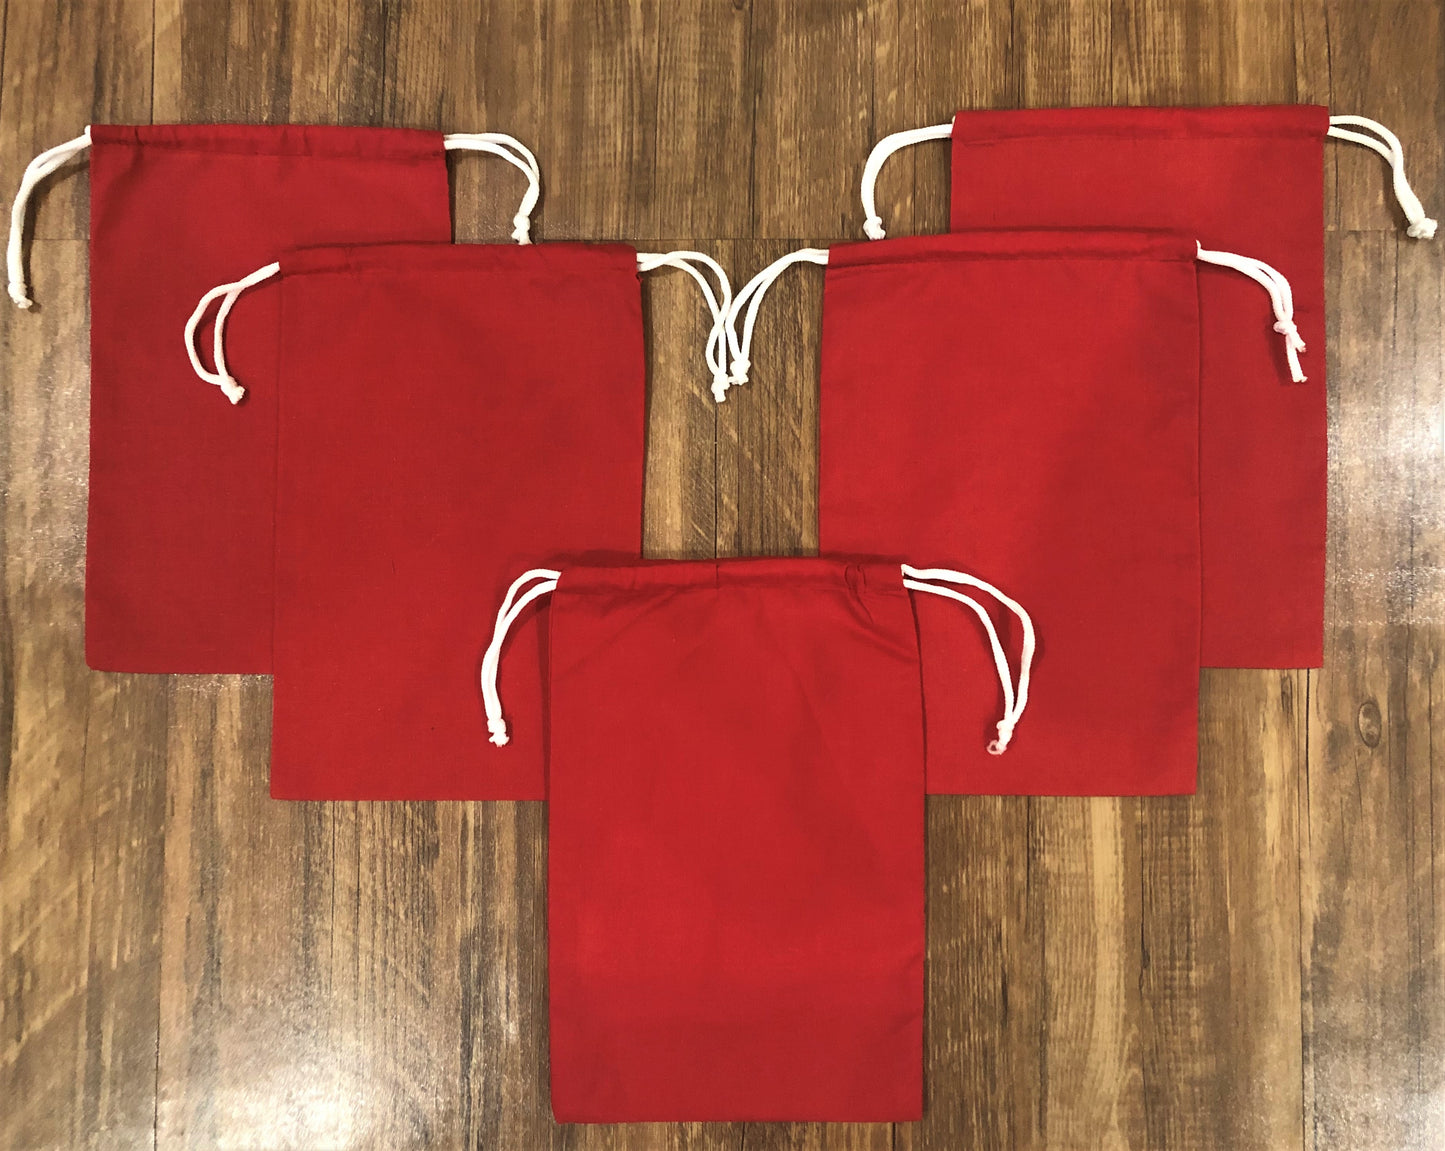 12x16 Inches Reusable Eco-Friendly Cotton Double Drawstring Bags Red Color